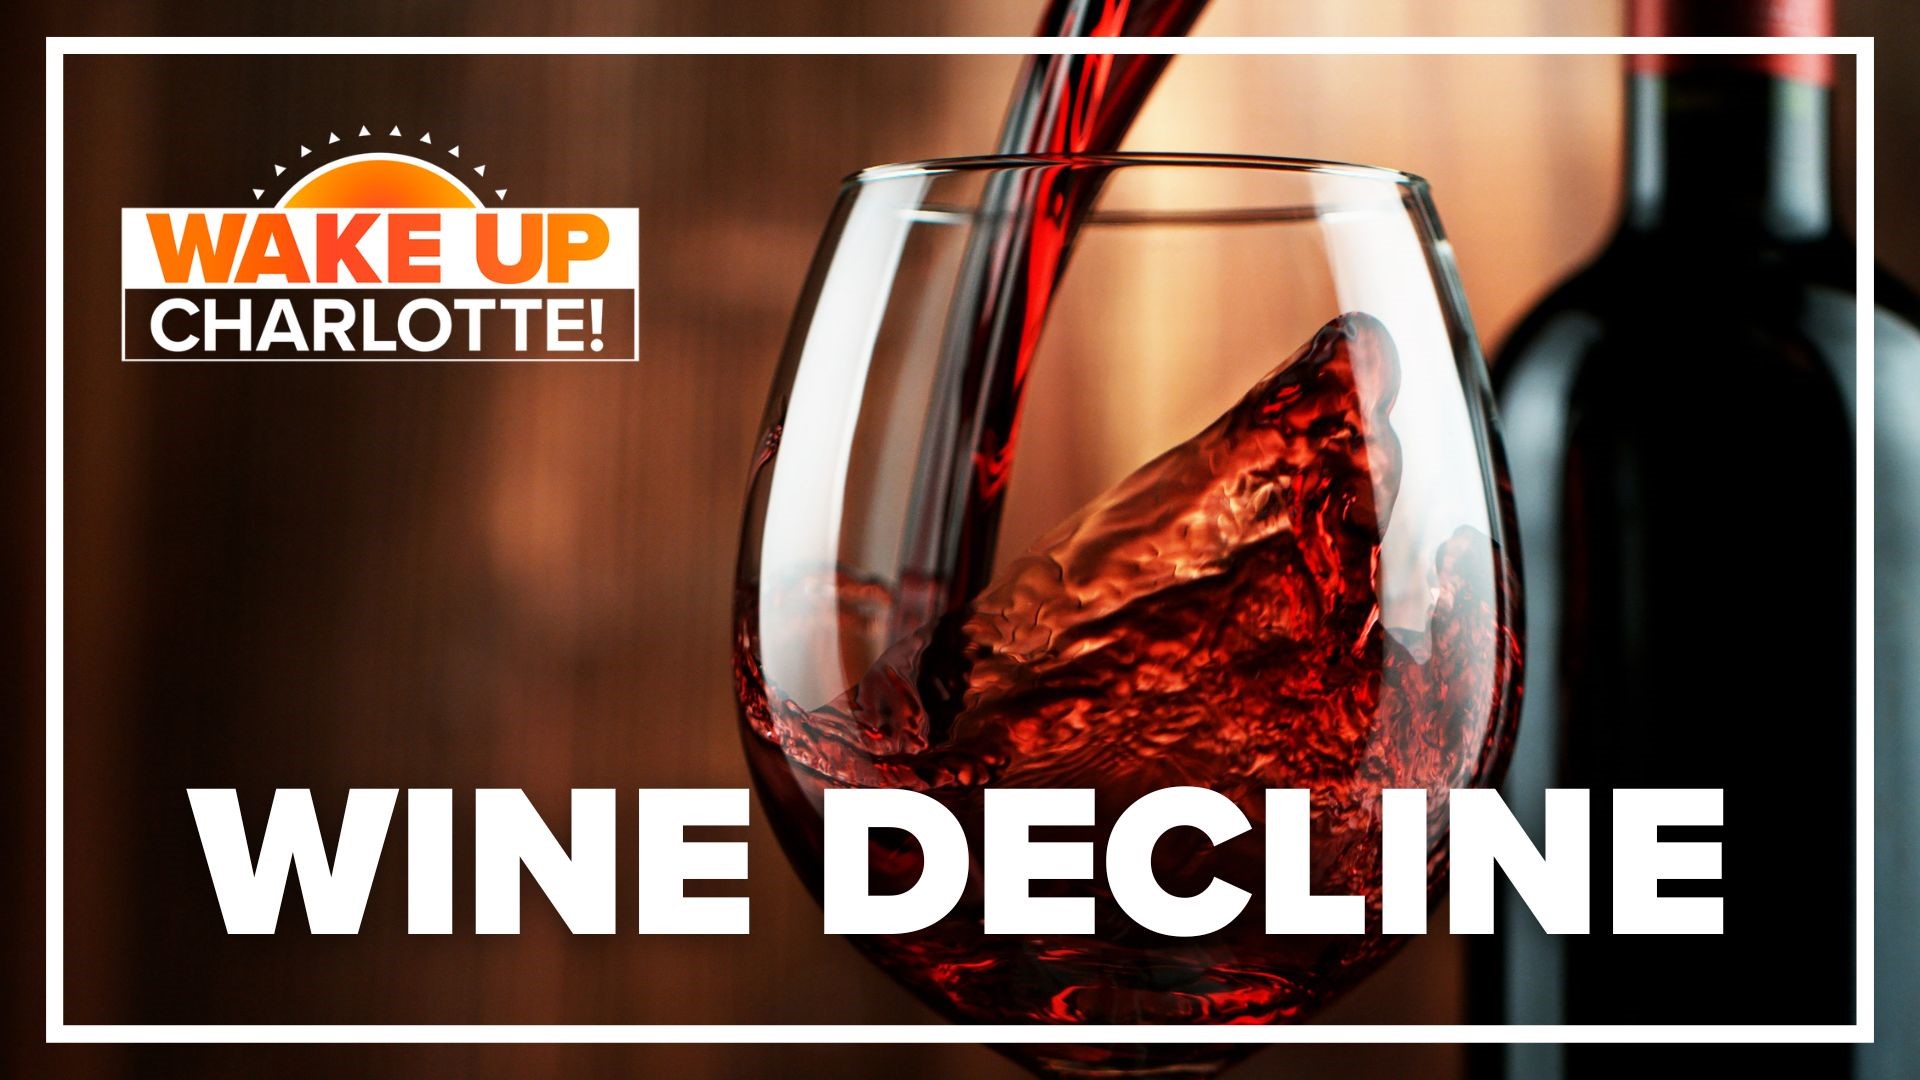 A new report shows a grim reality for the American wine industry, and if something doesn't change soon, it could spell disaster for winemakers and advertisers.